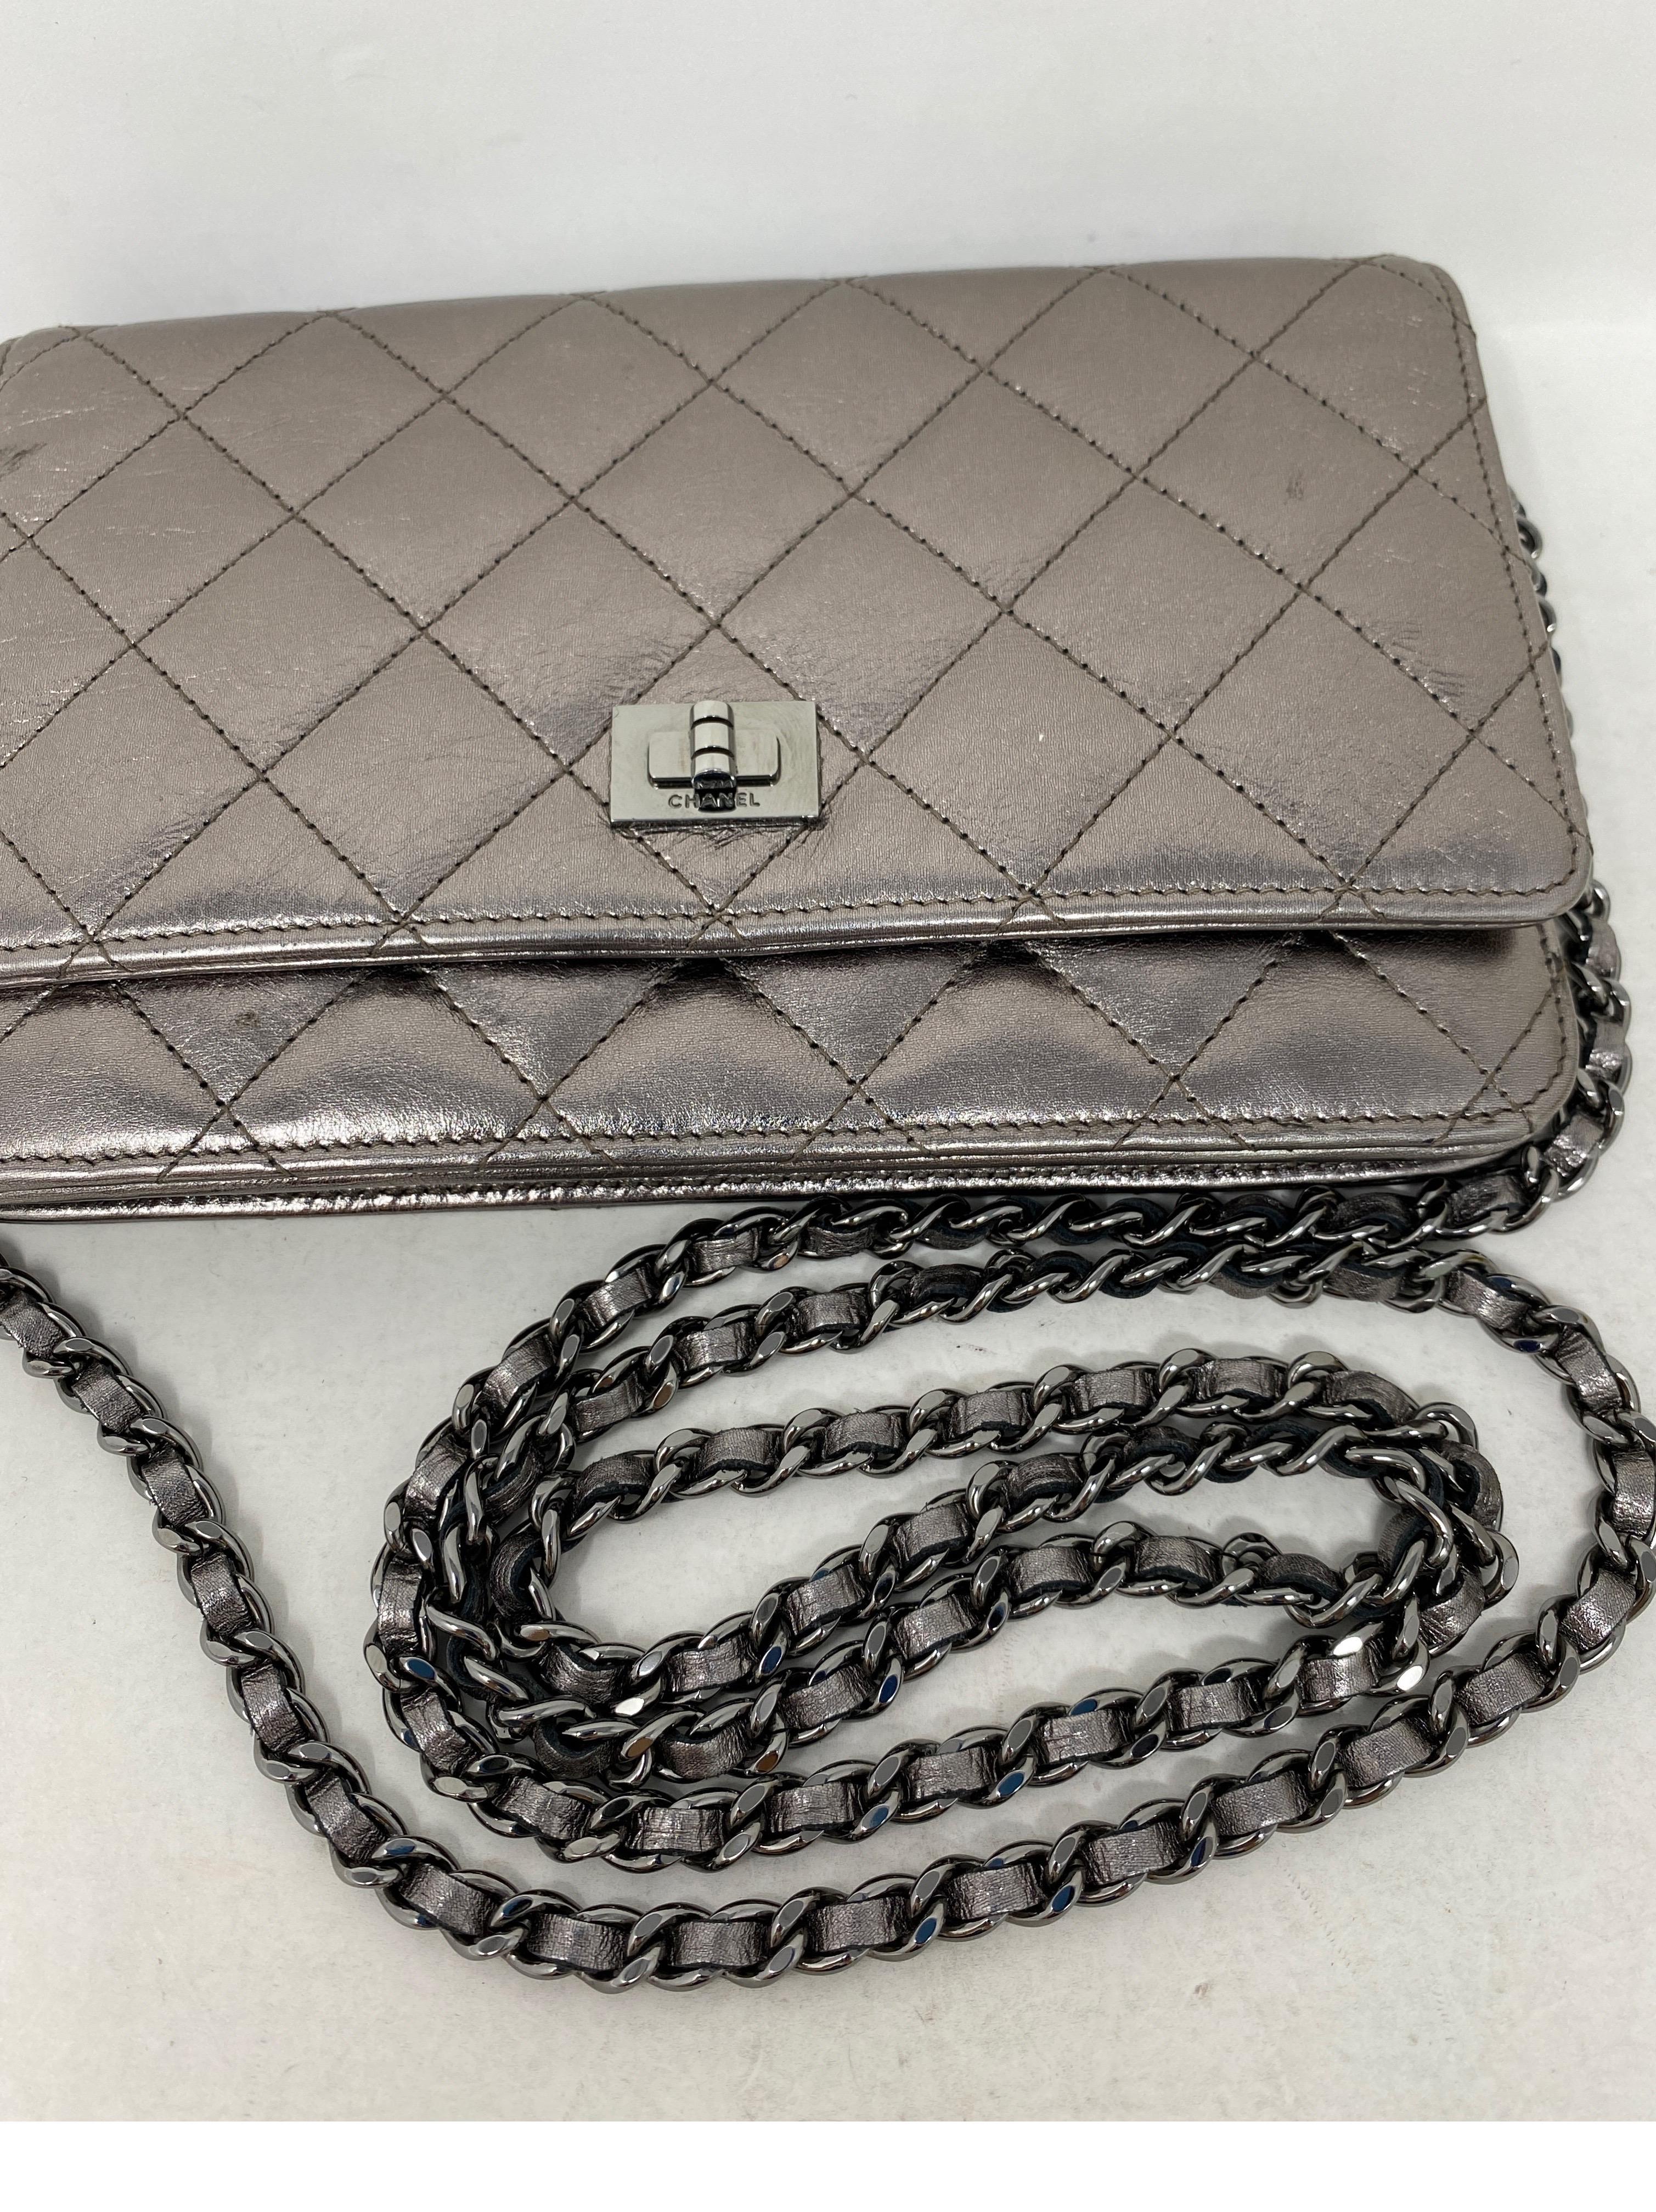 Chanel Silver Metallic Reissue Wallet On A Chain Bag 3